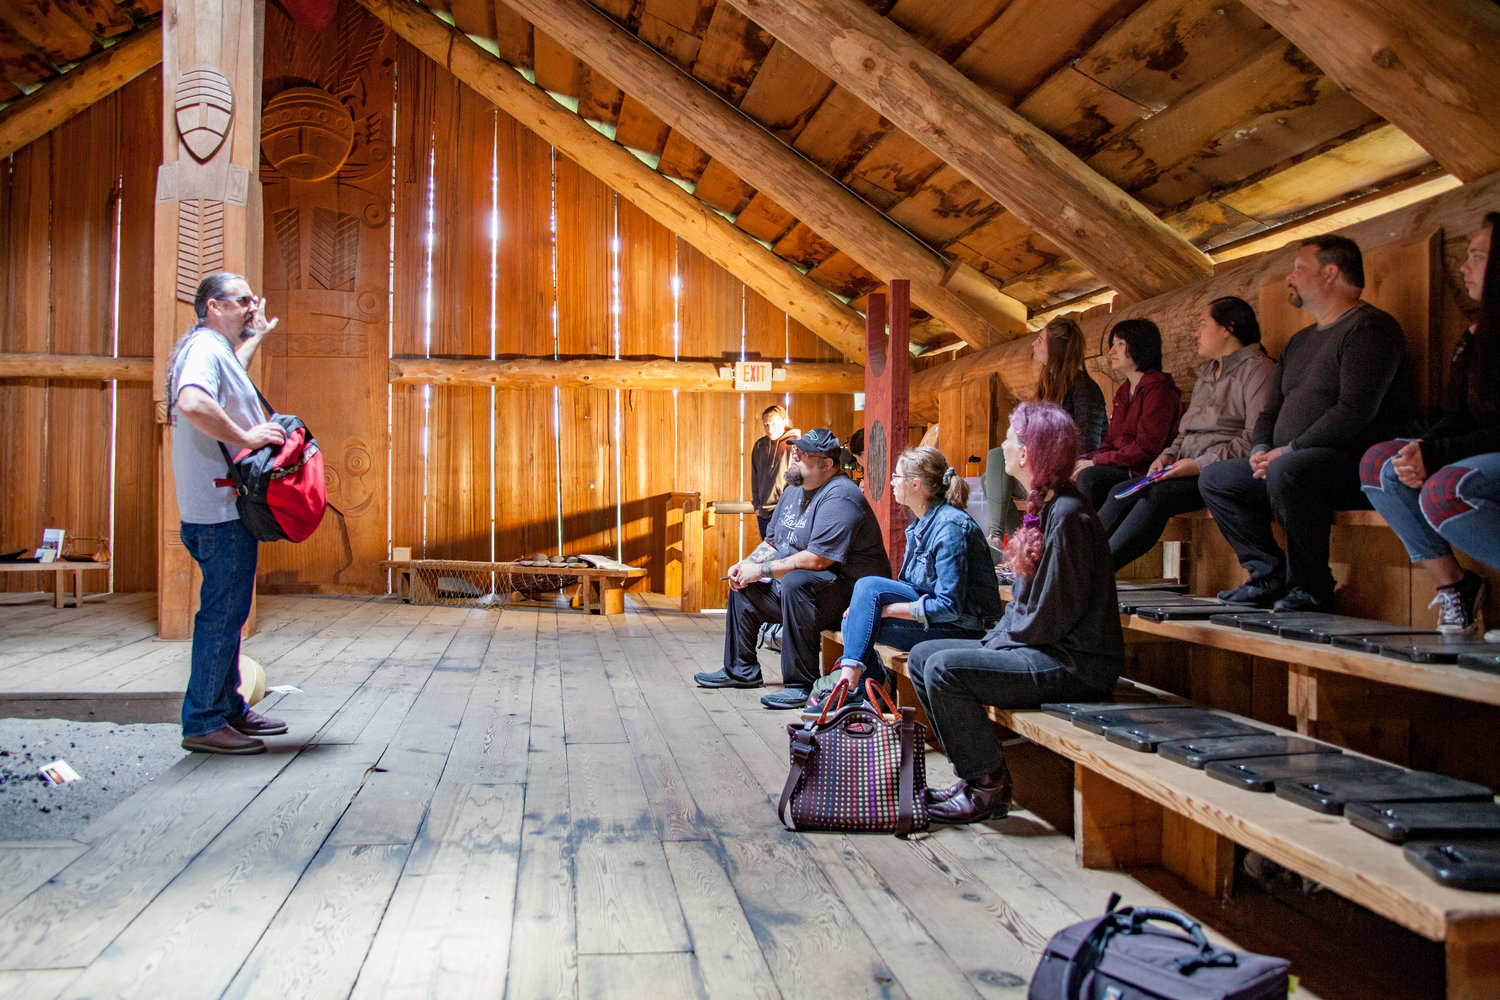 2019 FILE PHOTO — Faculty and students of WSU Vancouver’s English 341 meet for a water safety orientation in the Cathlapotle Plankhouse at the Ridgefield National Wildlife Refuge.